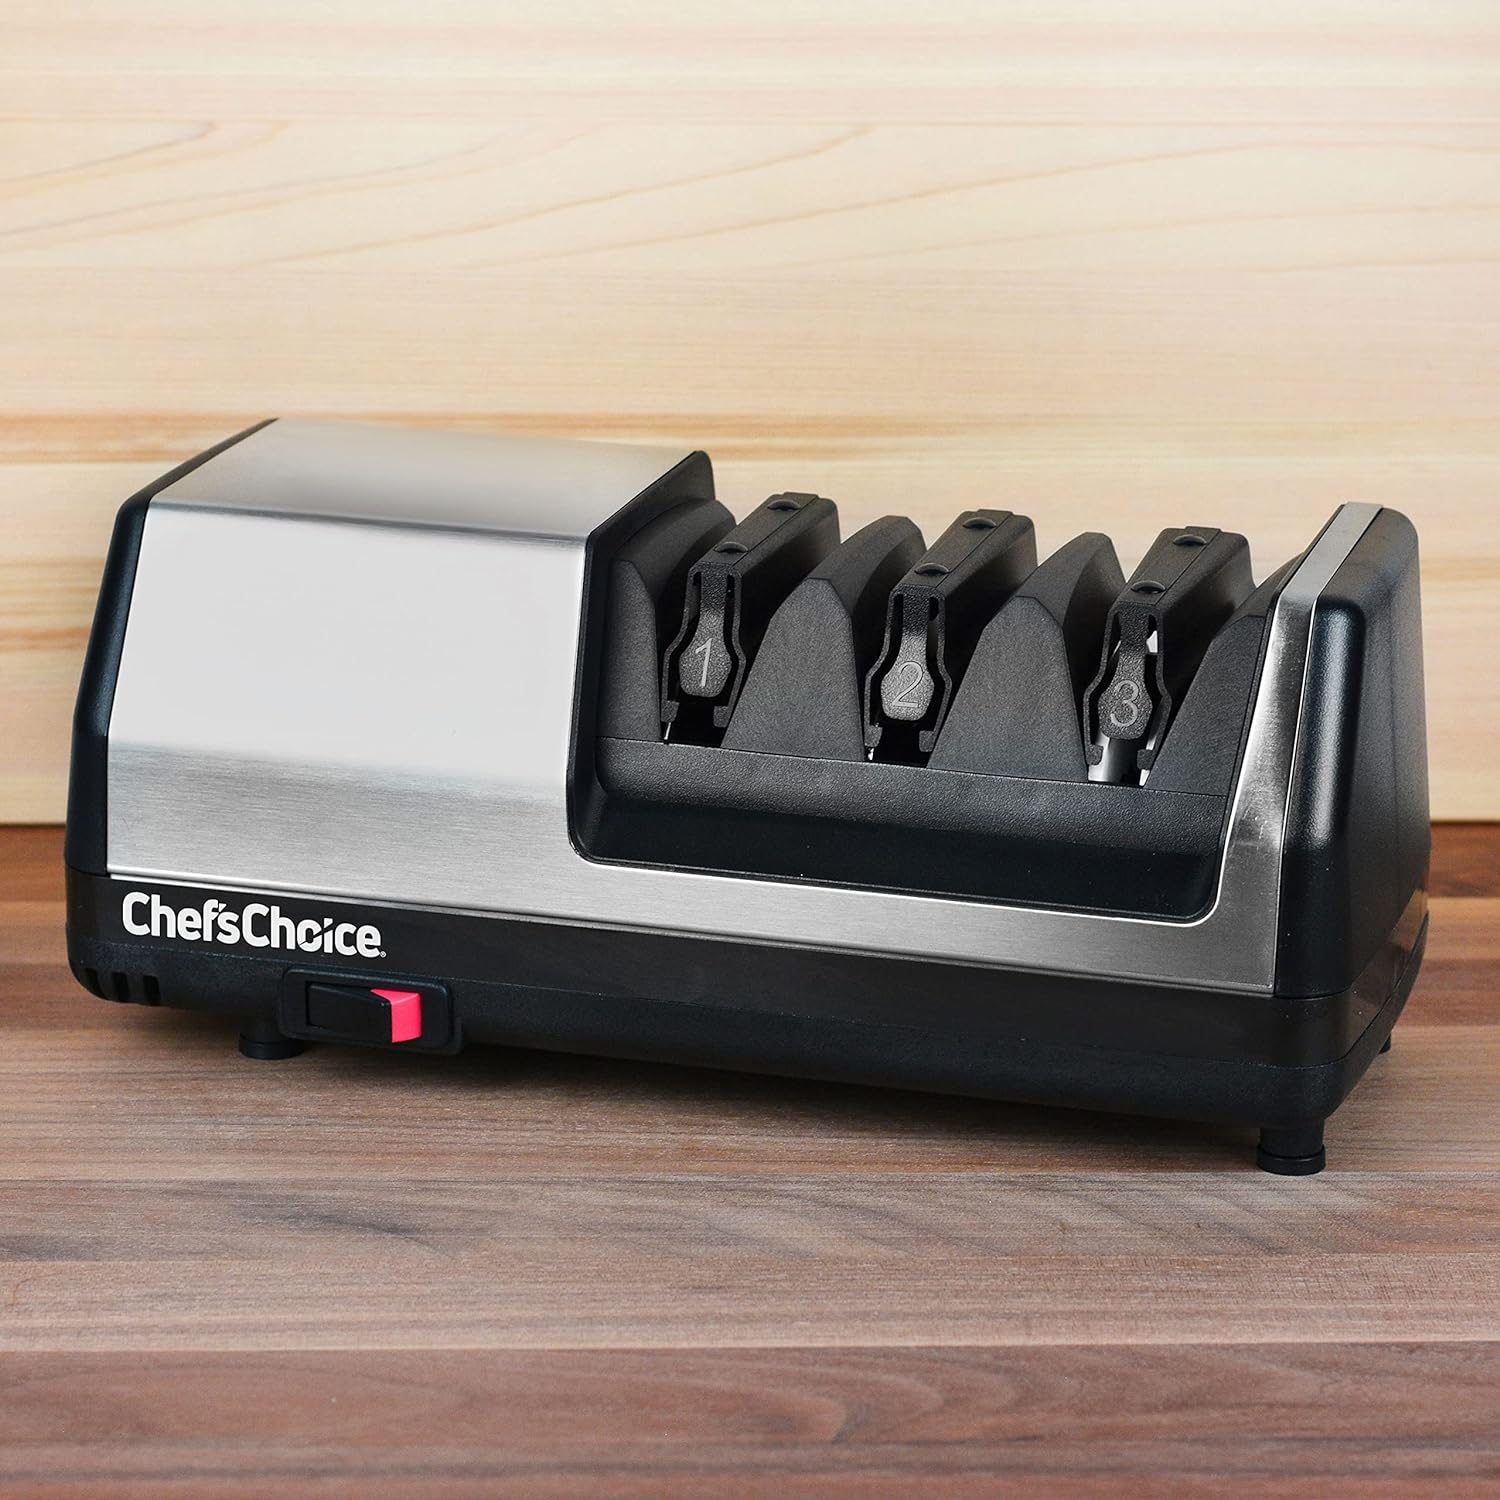 Chefs Choice Model 151 Universal Electric Knife Sharpener, Stainless Steel